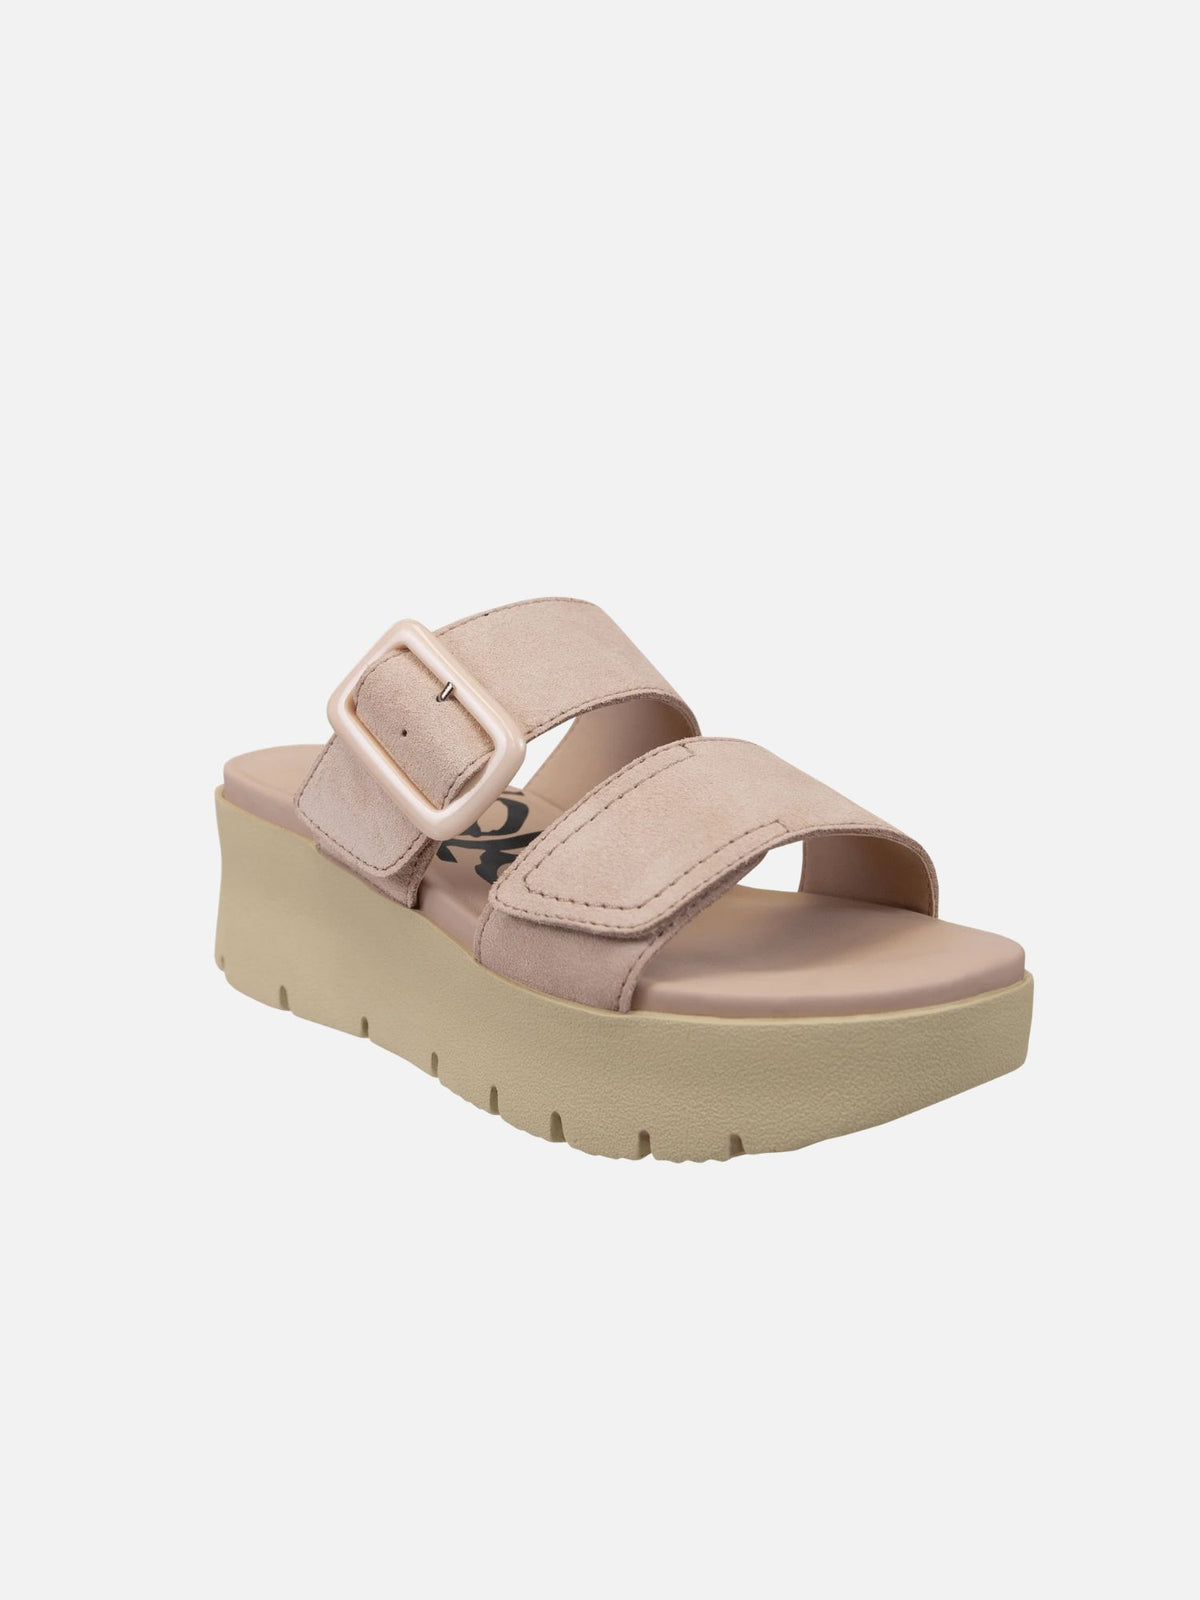 otbt cameo platform double strap sandal in beige-angled view